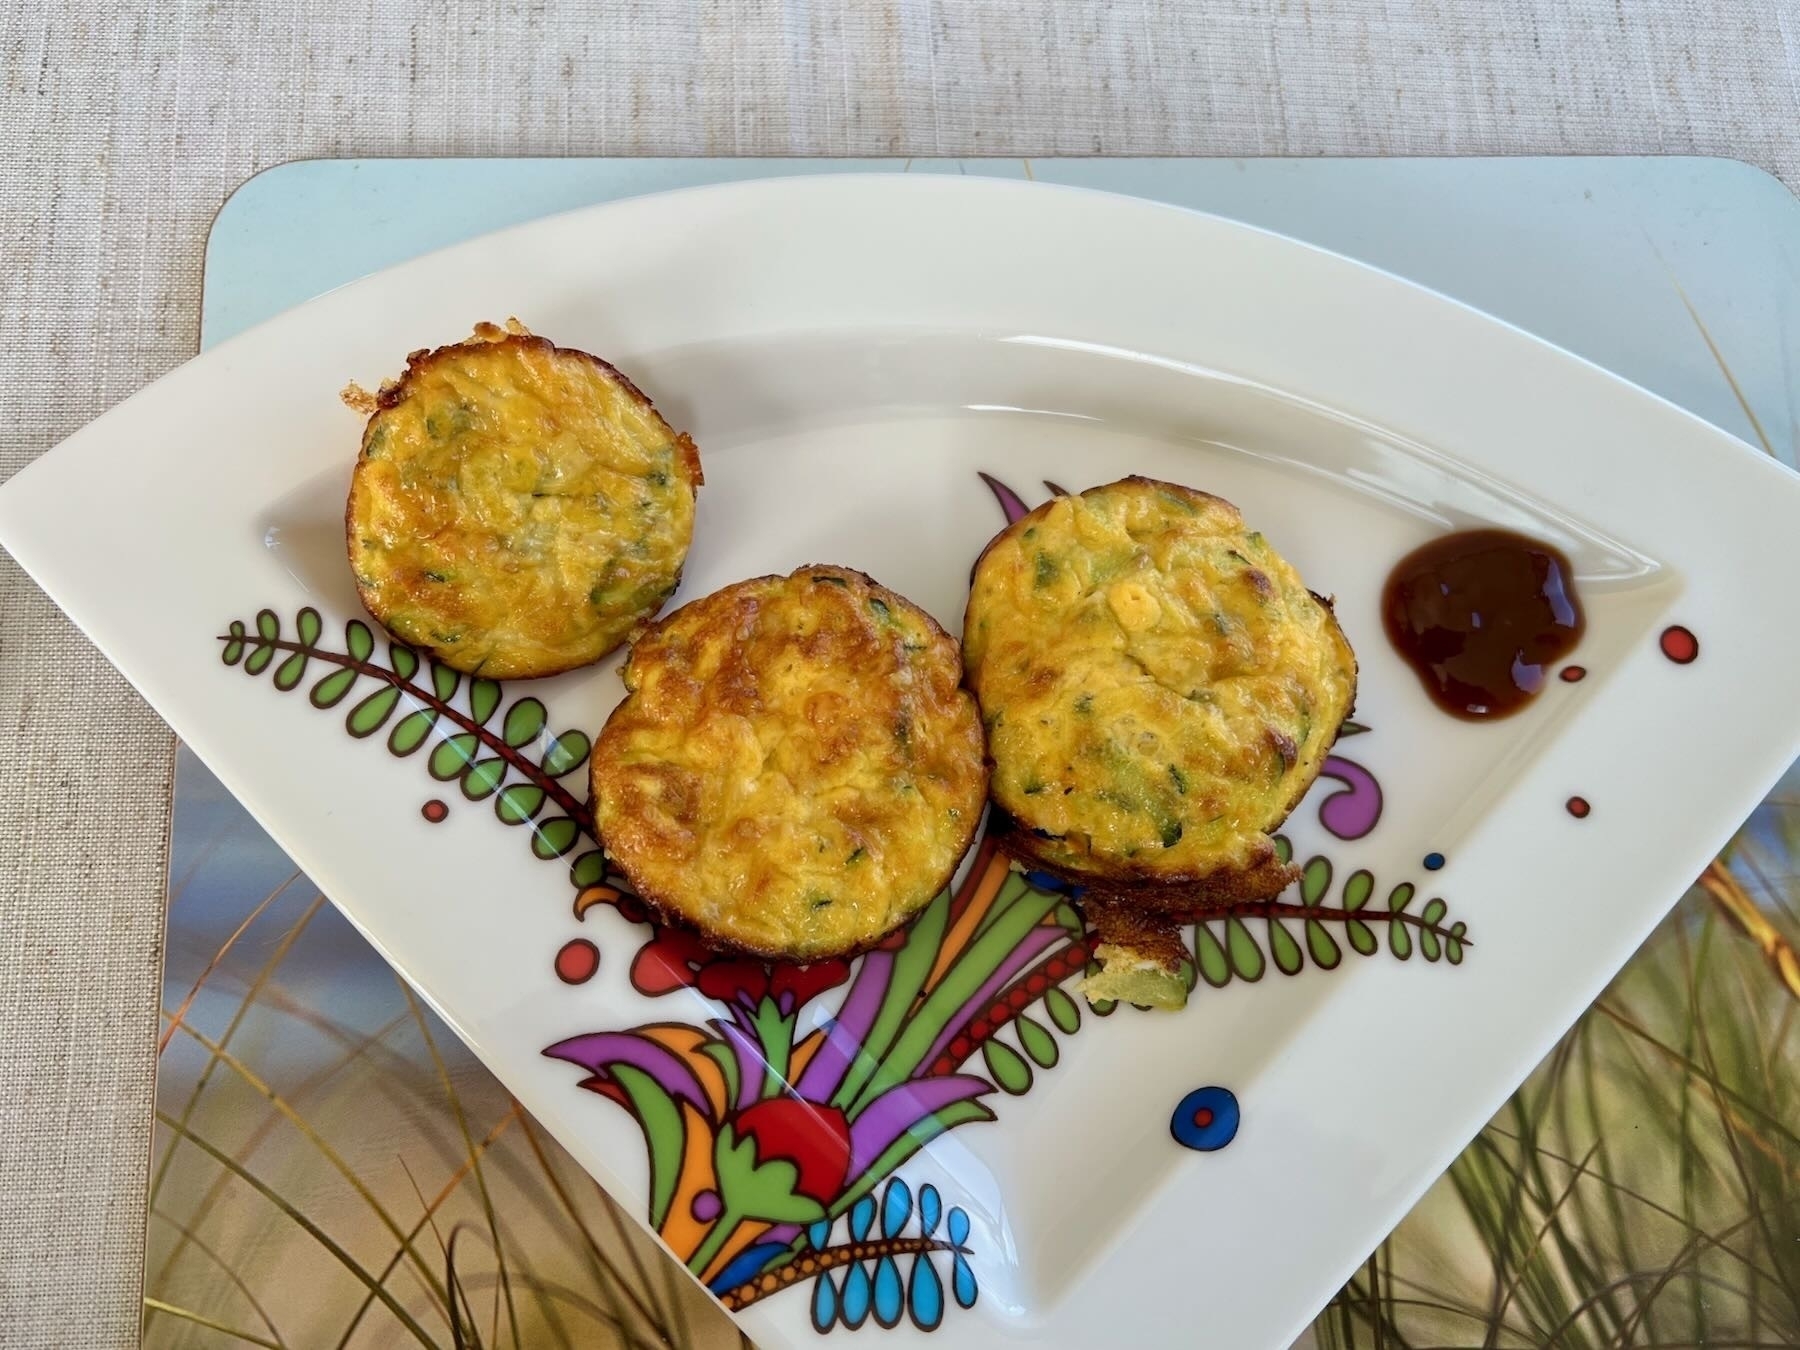 3 small frittatas on a plate. 